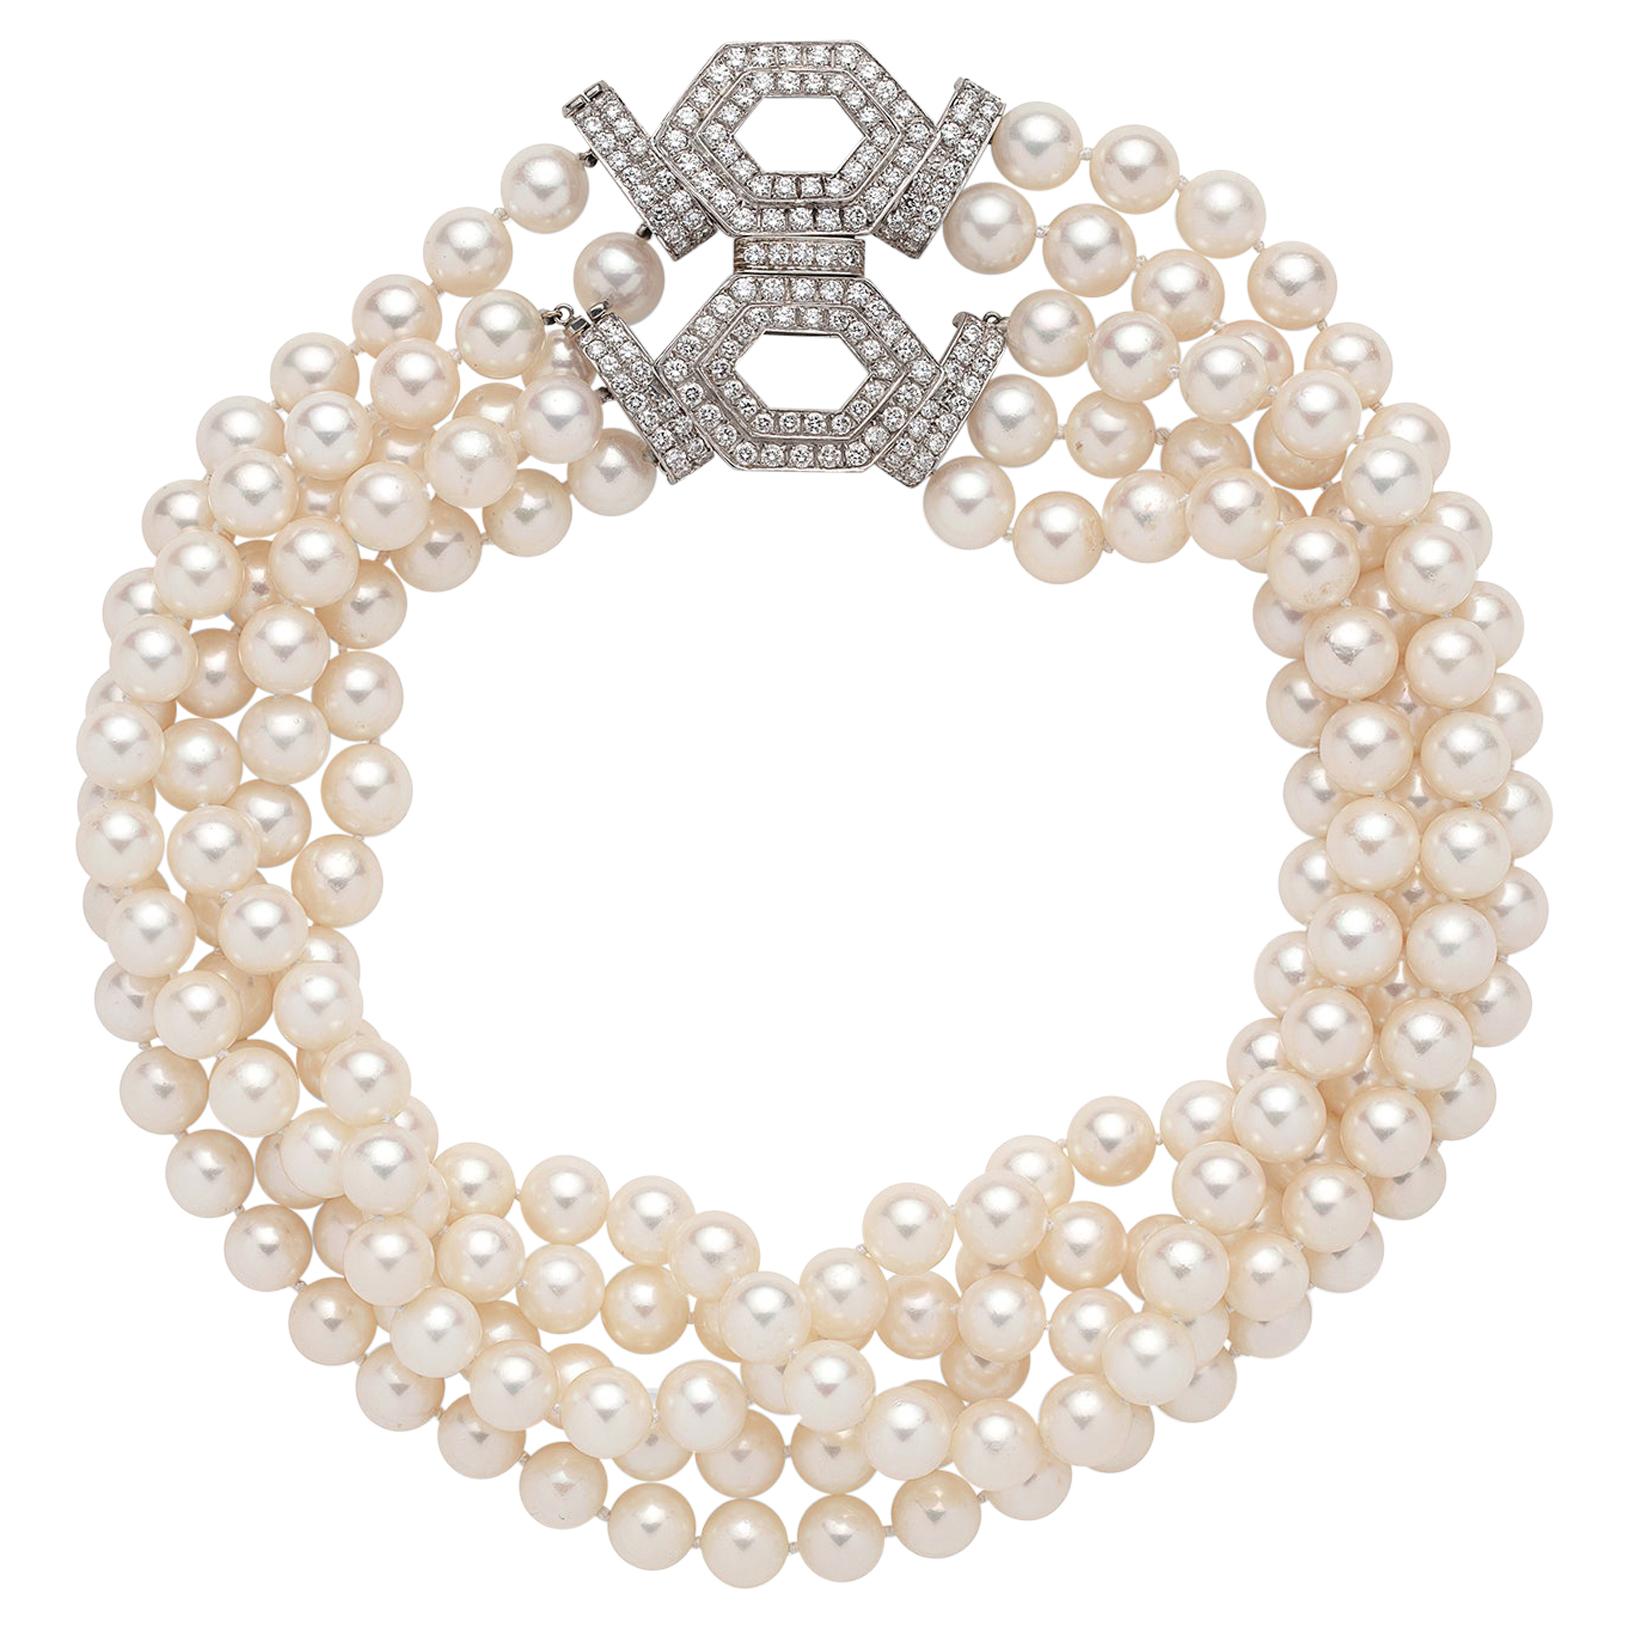 Cultured Pearl, Diamond and 18 Karat White Gold Necklace by Trio